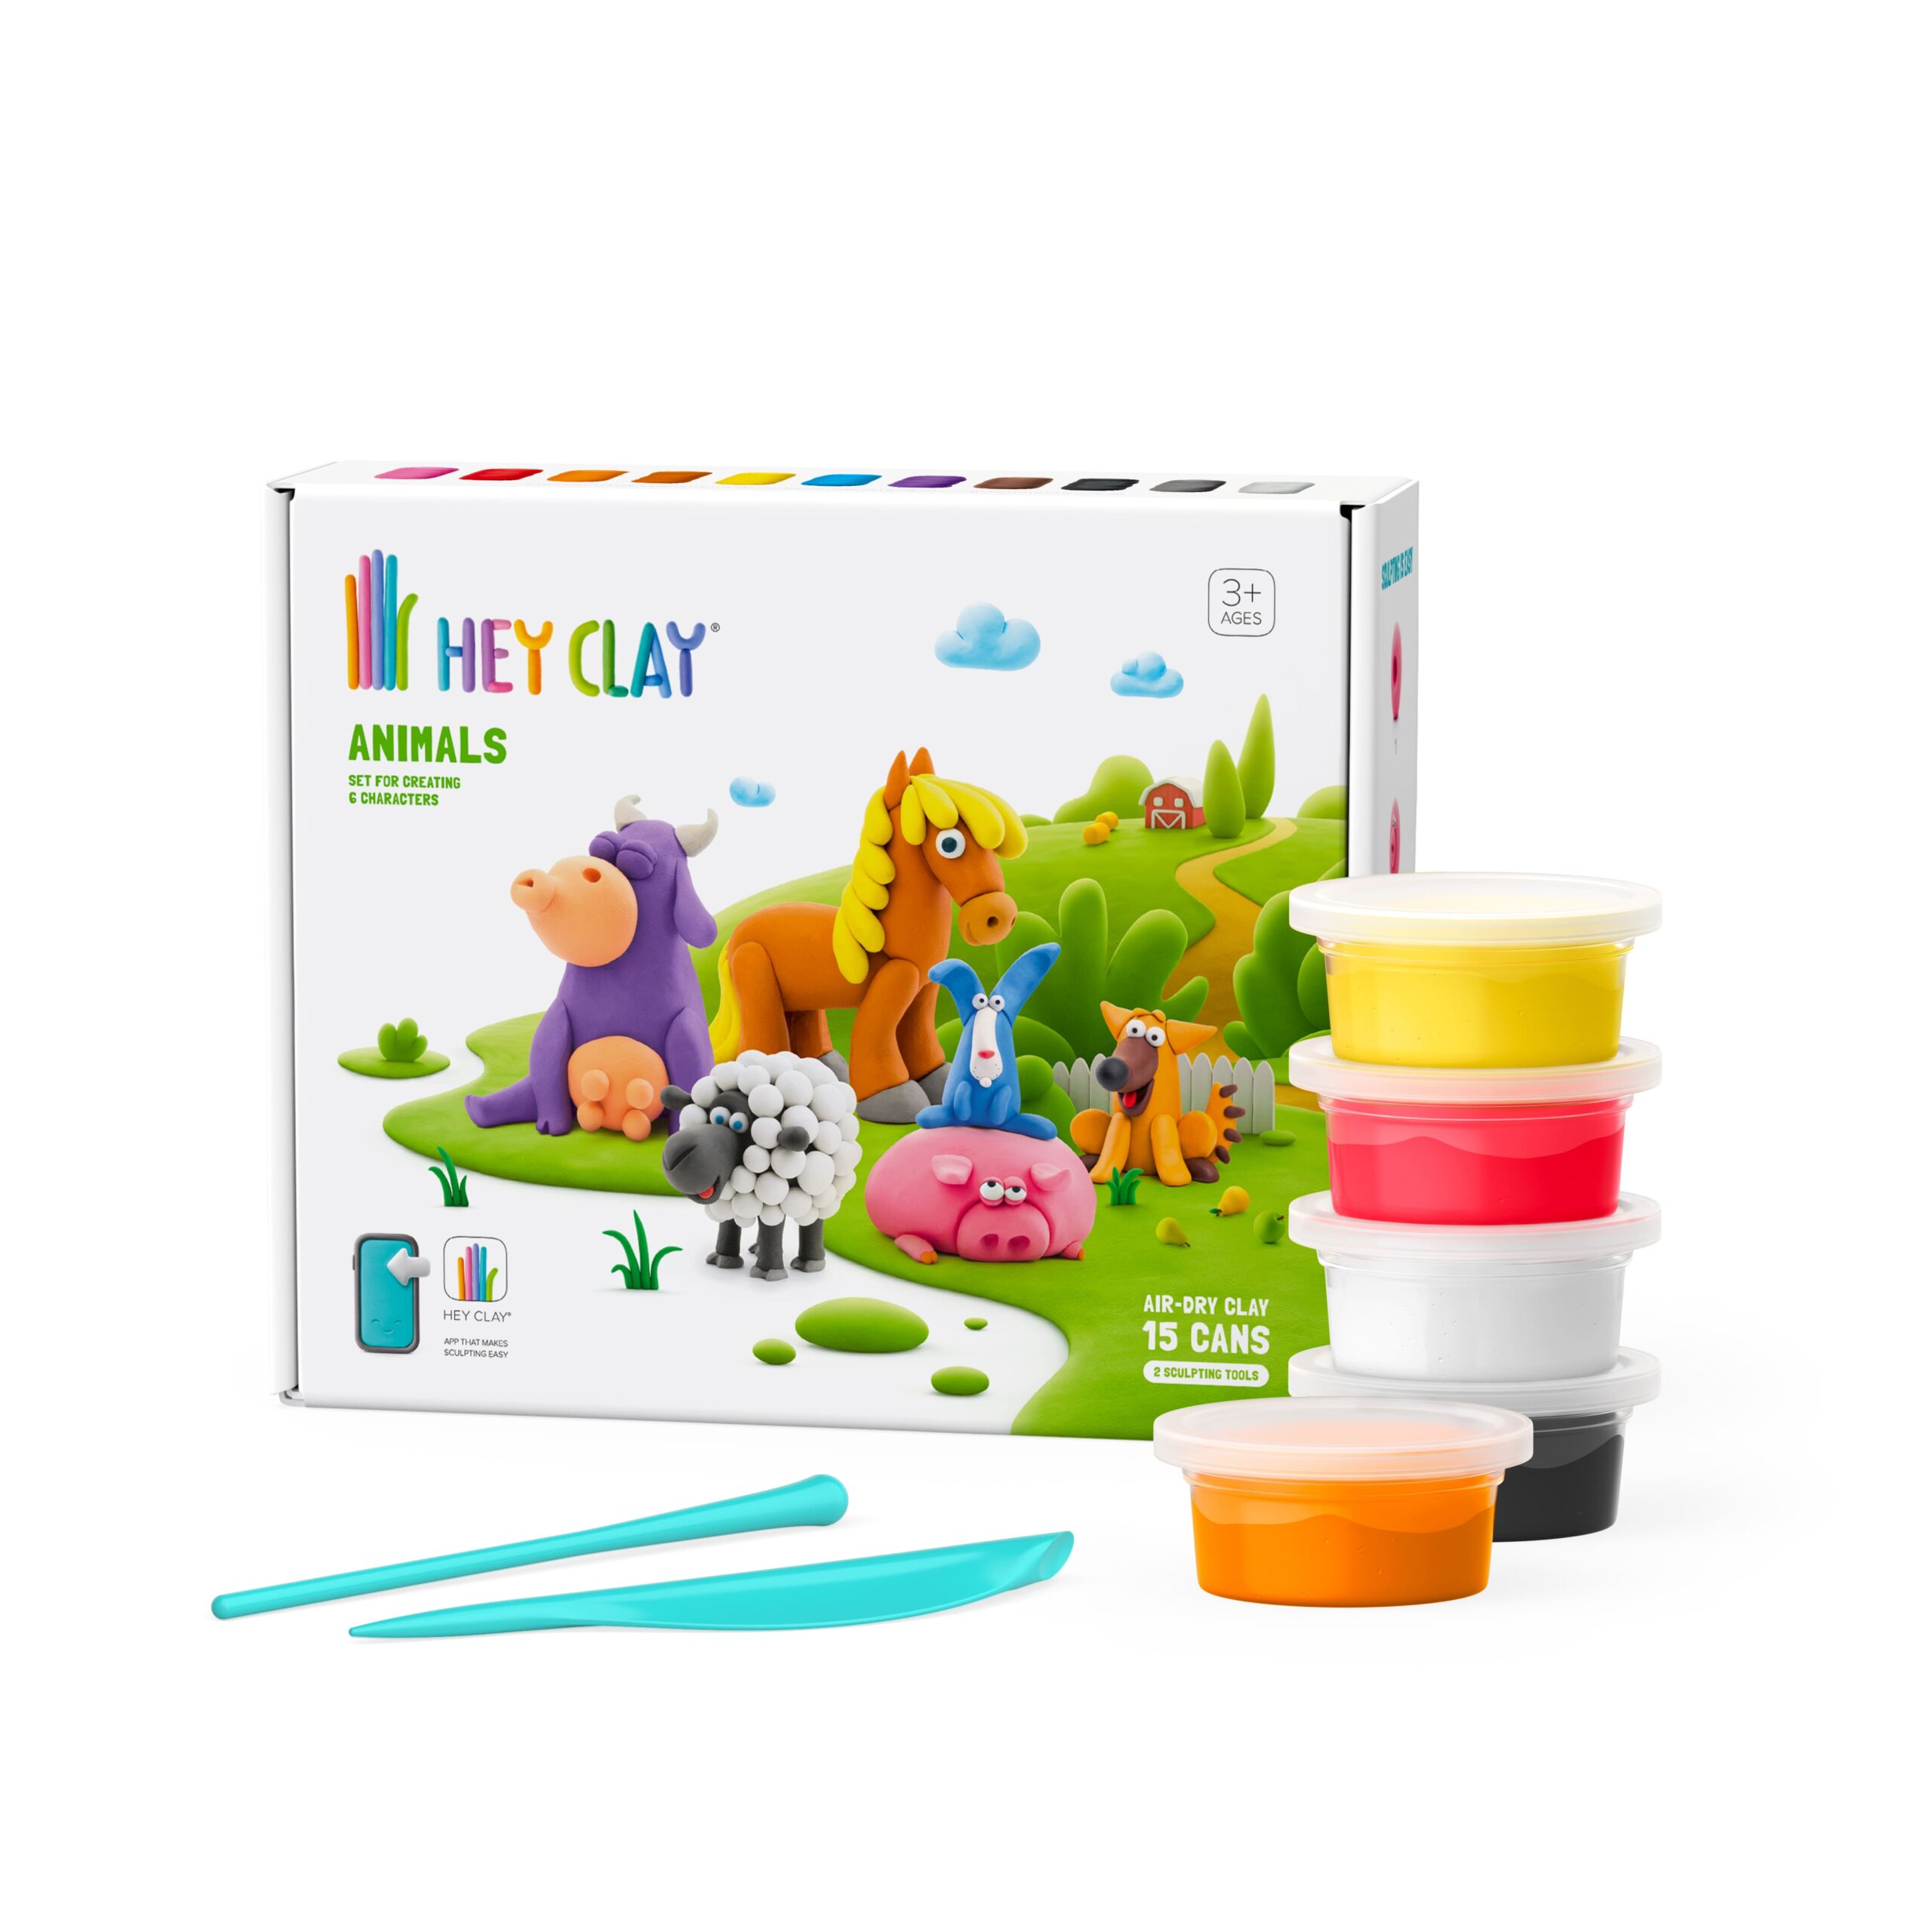 Featured image for “Platz 1 – Hey Clay (TOMY)”